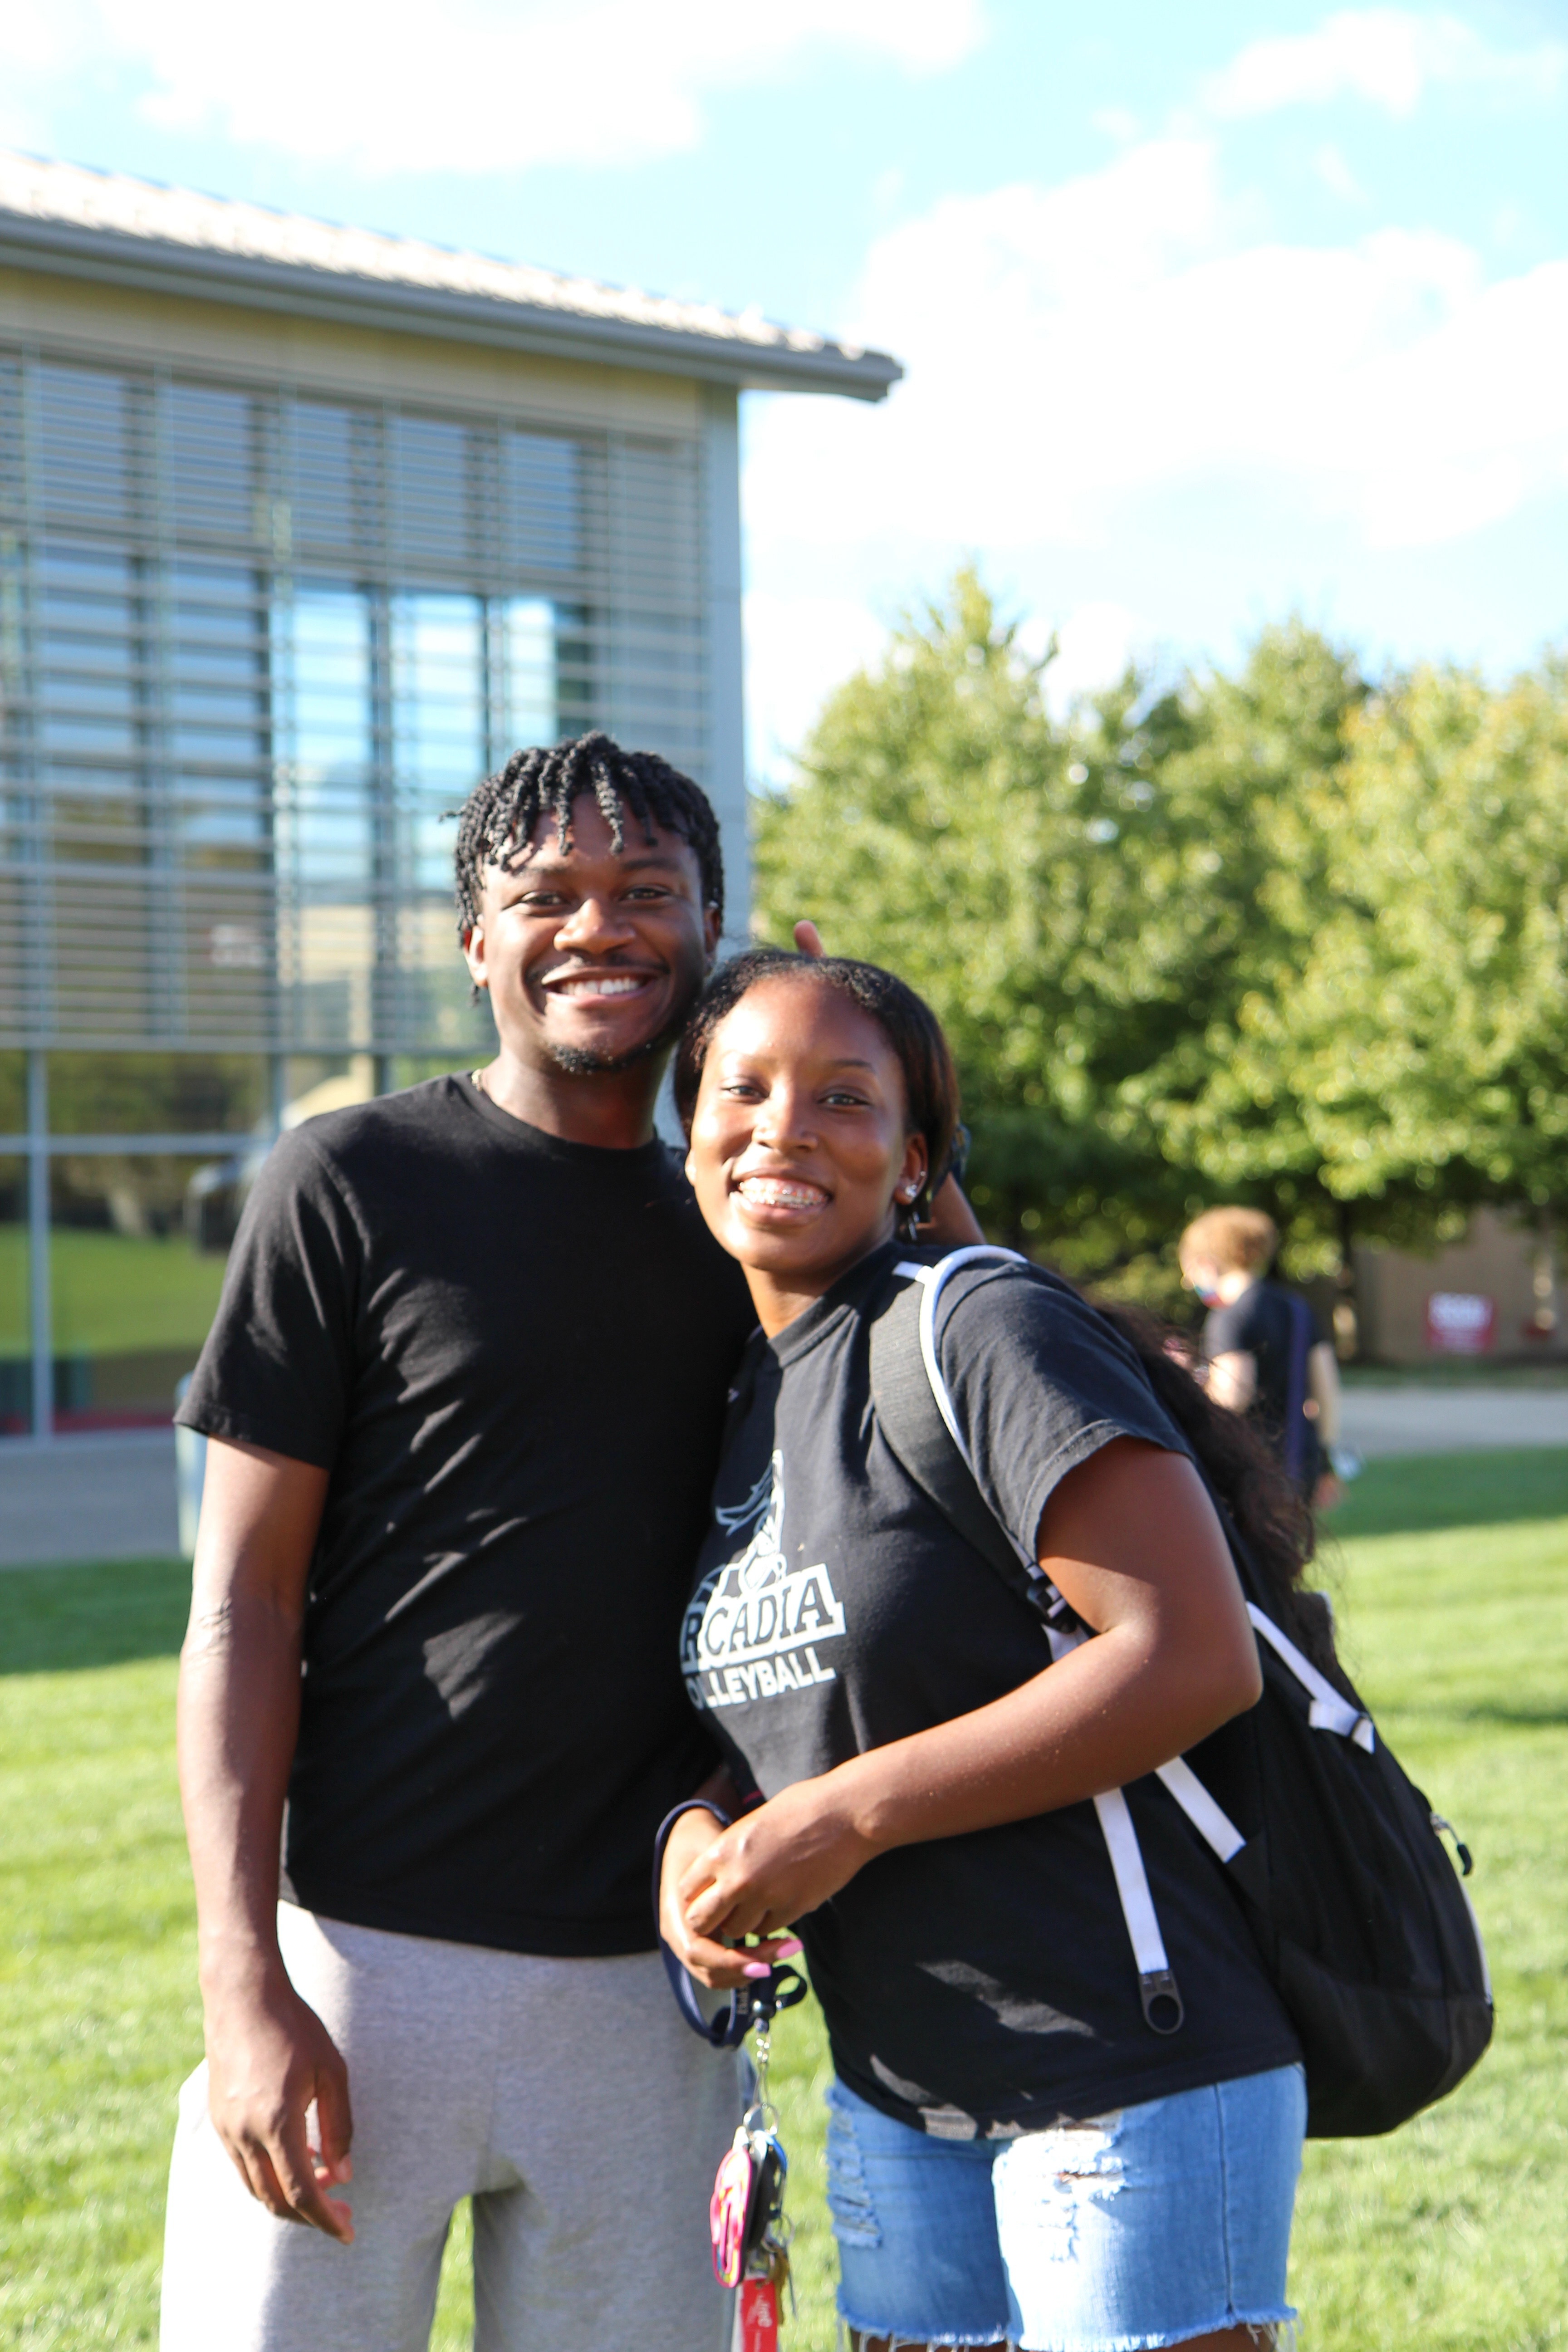 Two people posing together at the Activities Fair